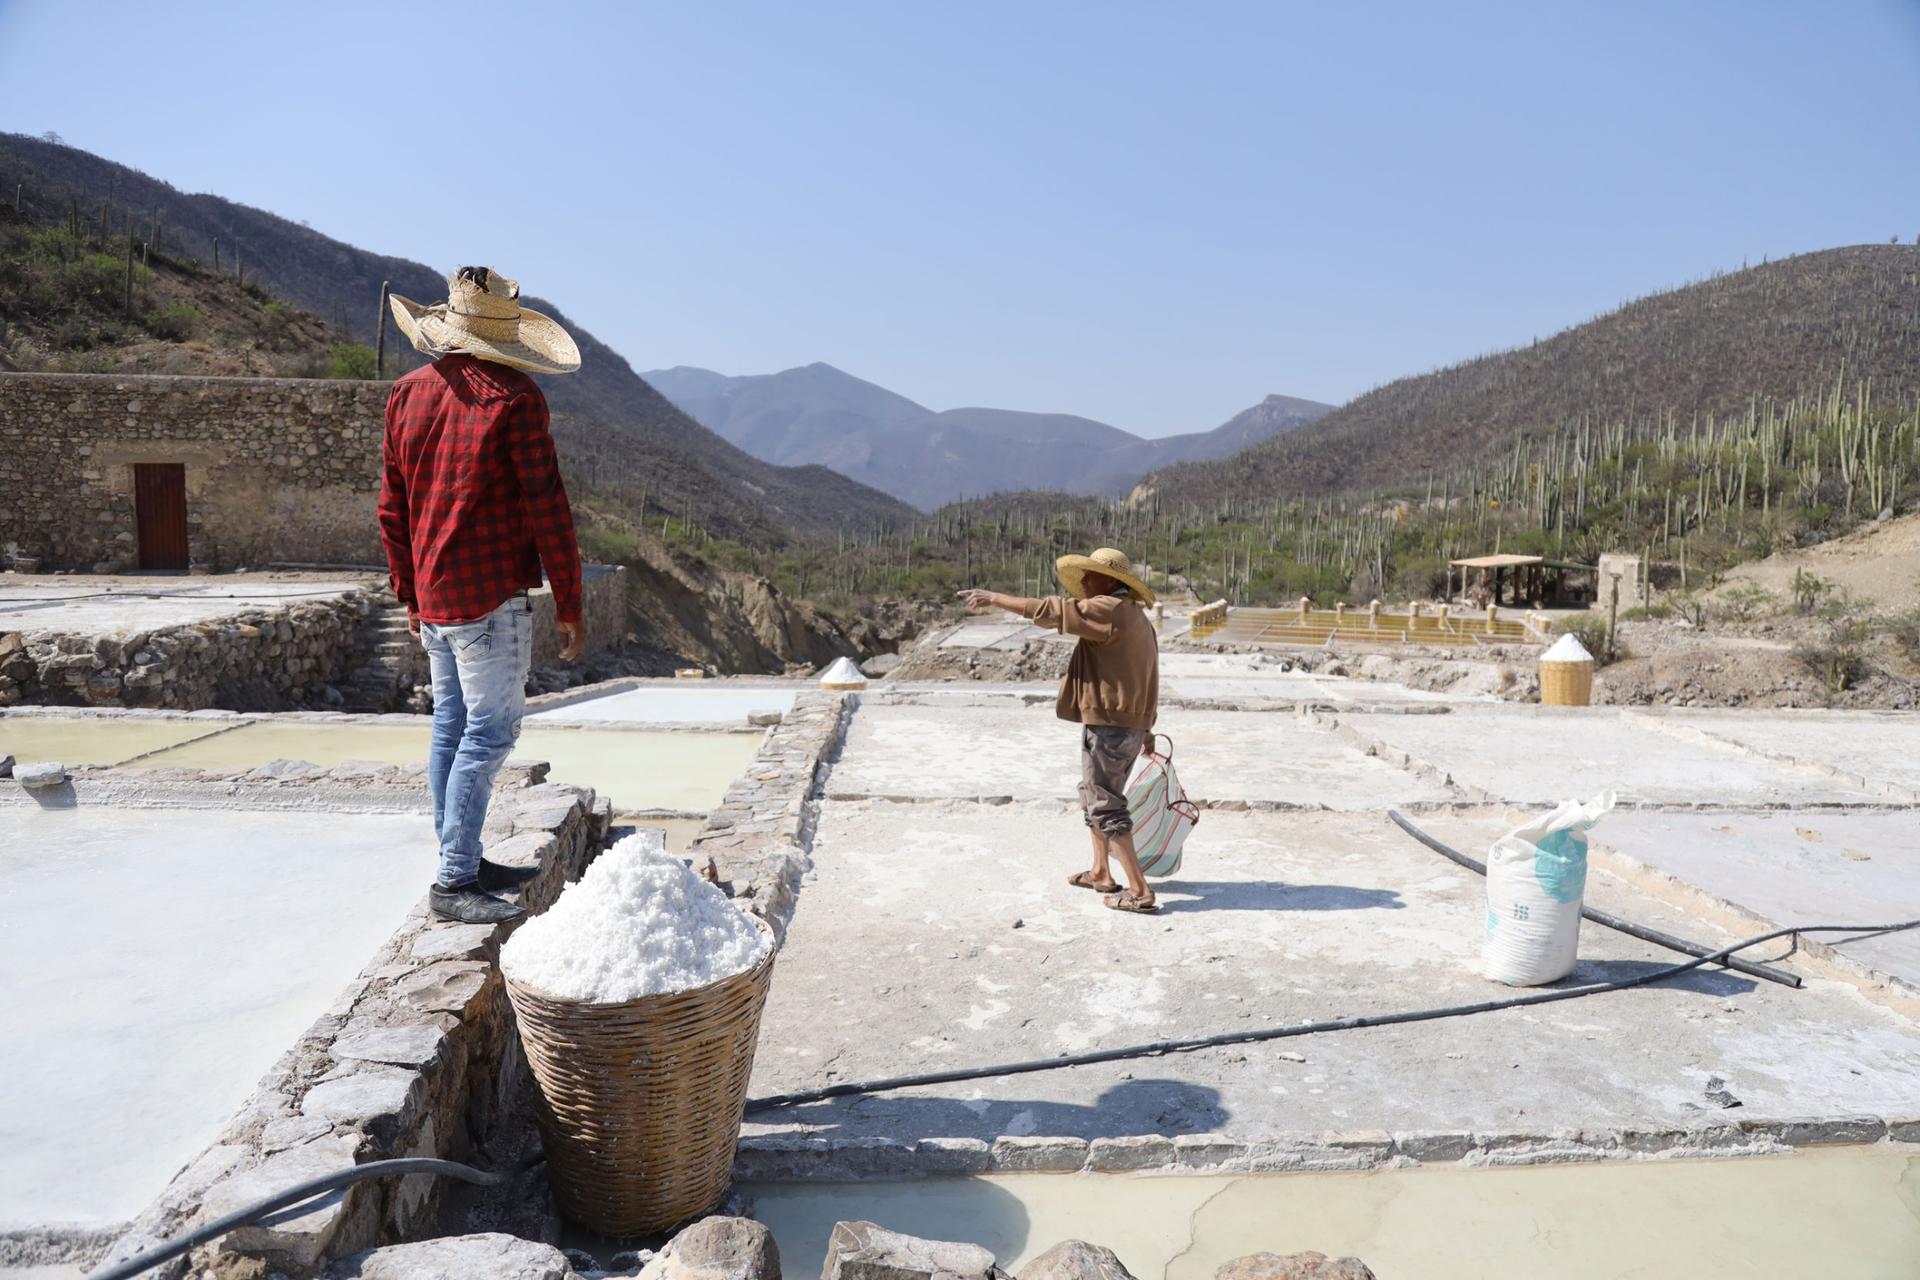 Pedro Salas Díaz has worked as a salt farmer most of his life in a tradition passed down for generations. 